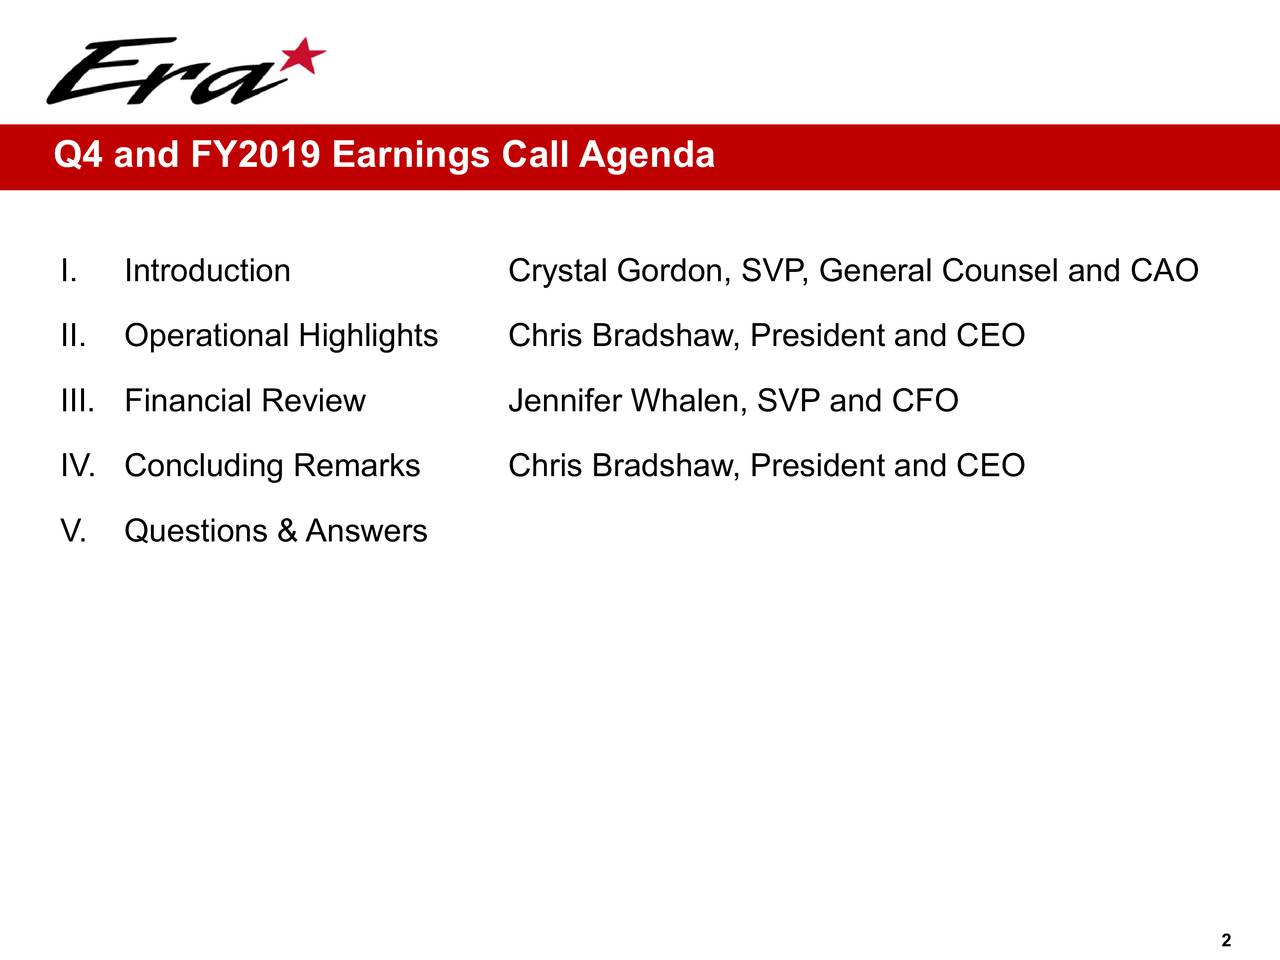 Q4 and FY2019 Earnings Call Agenda